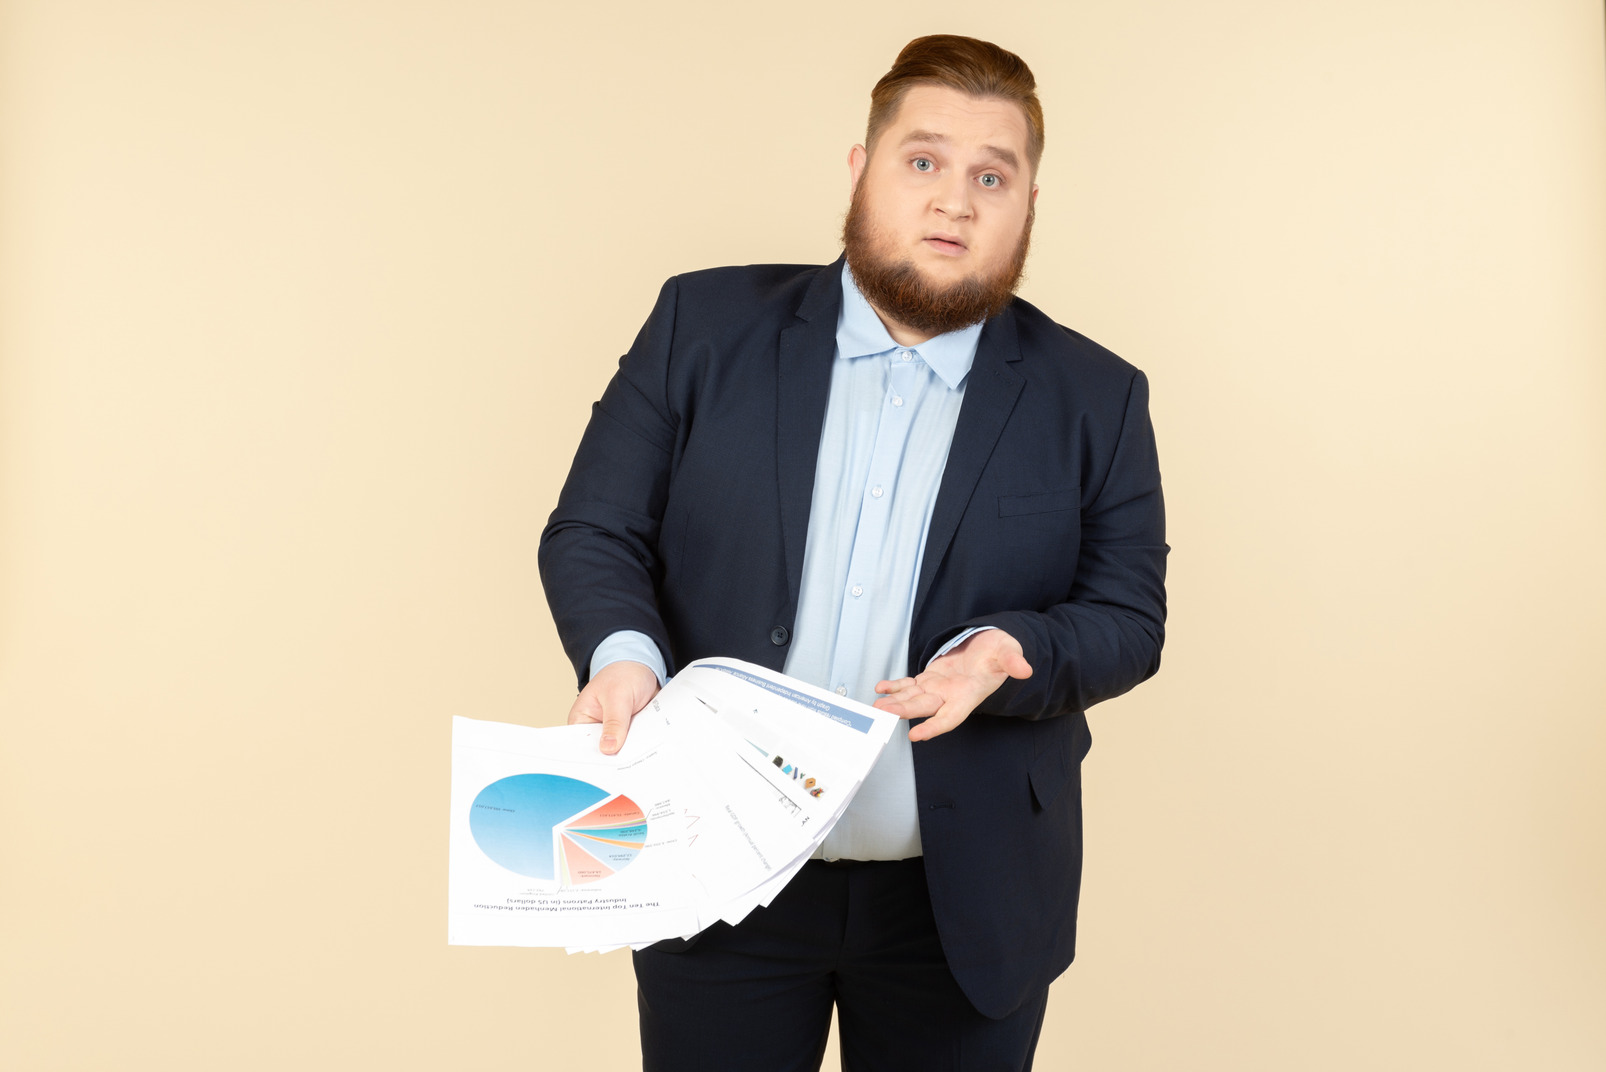 Overweight male office worker showing papers